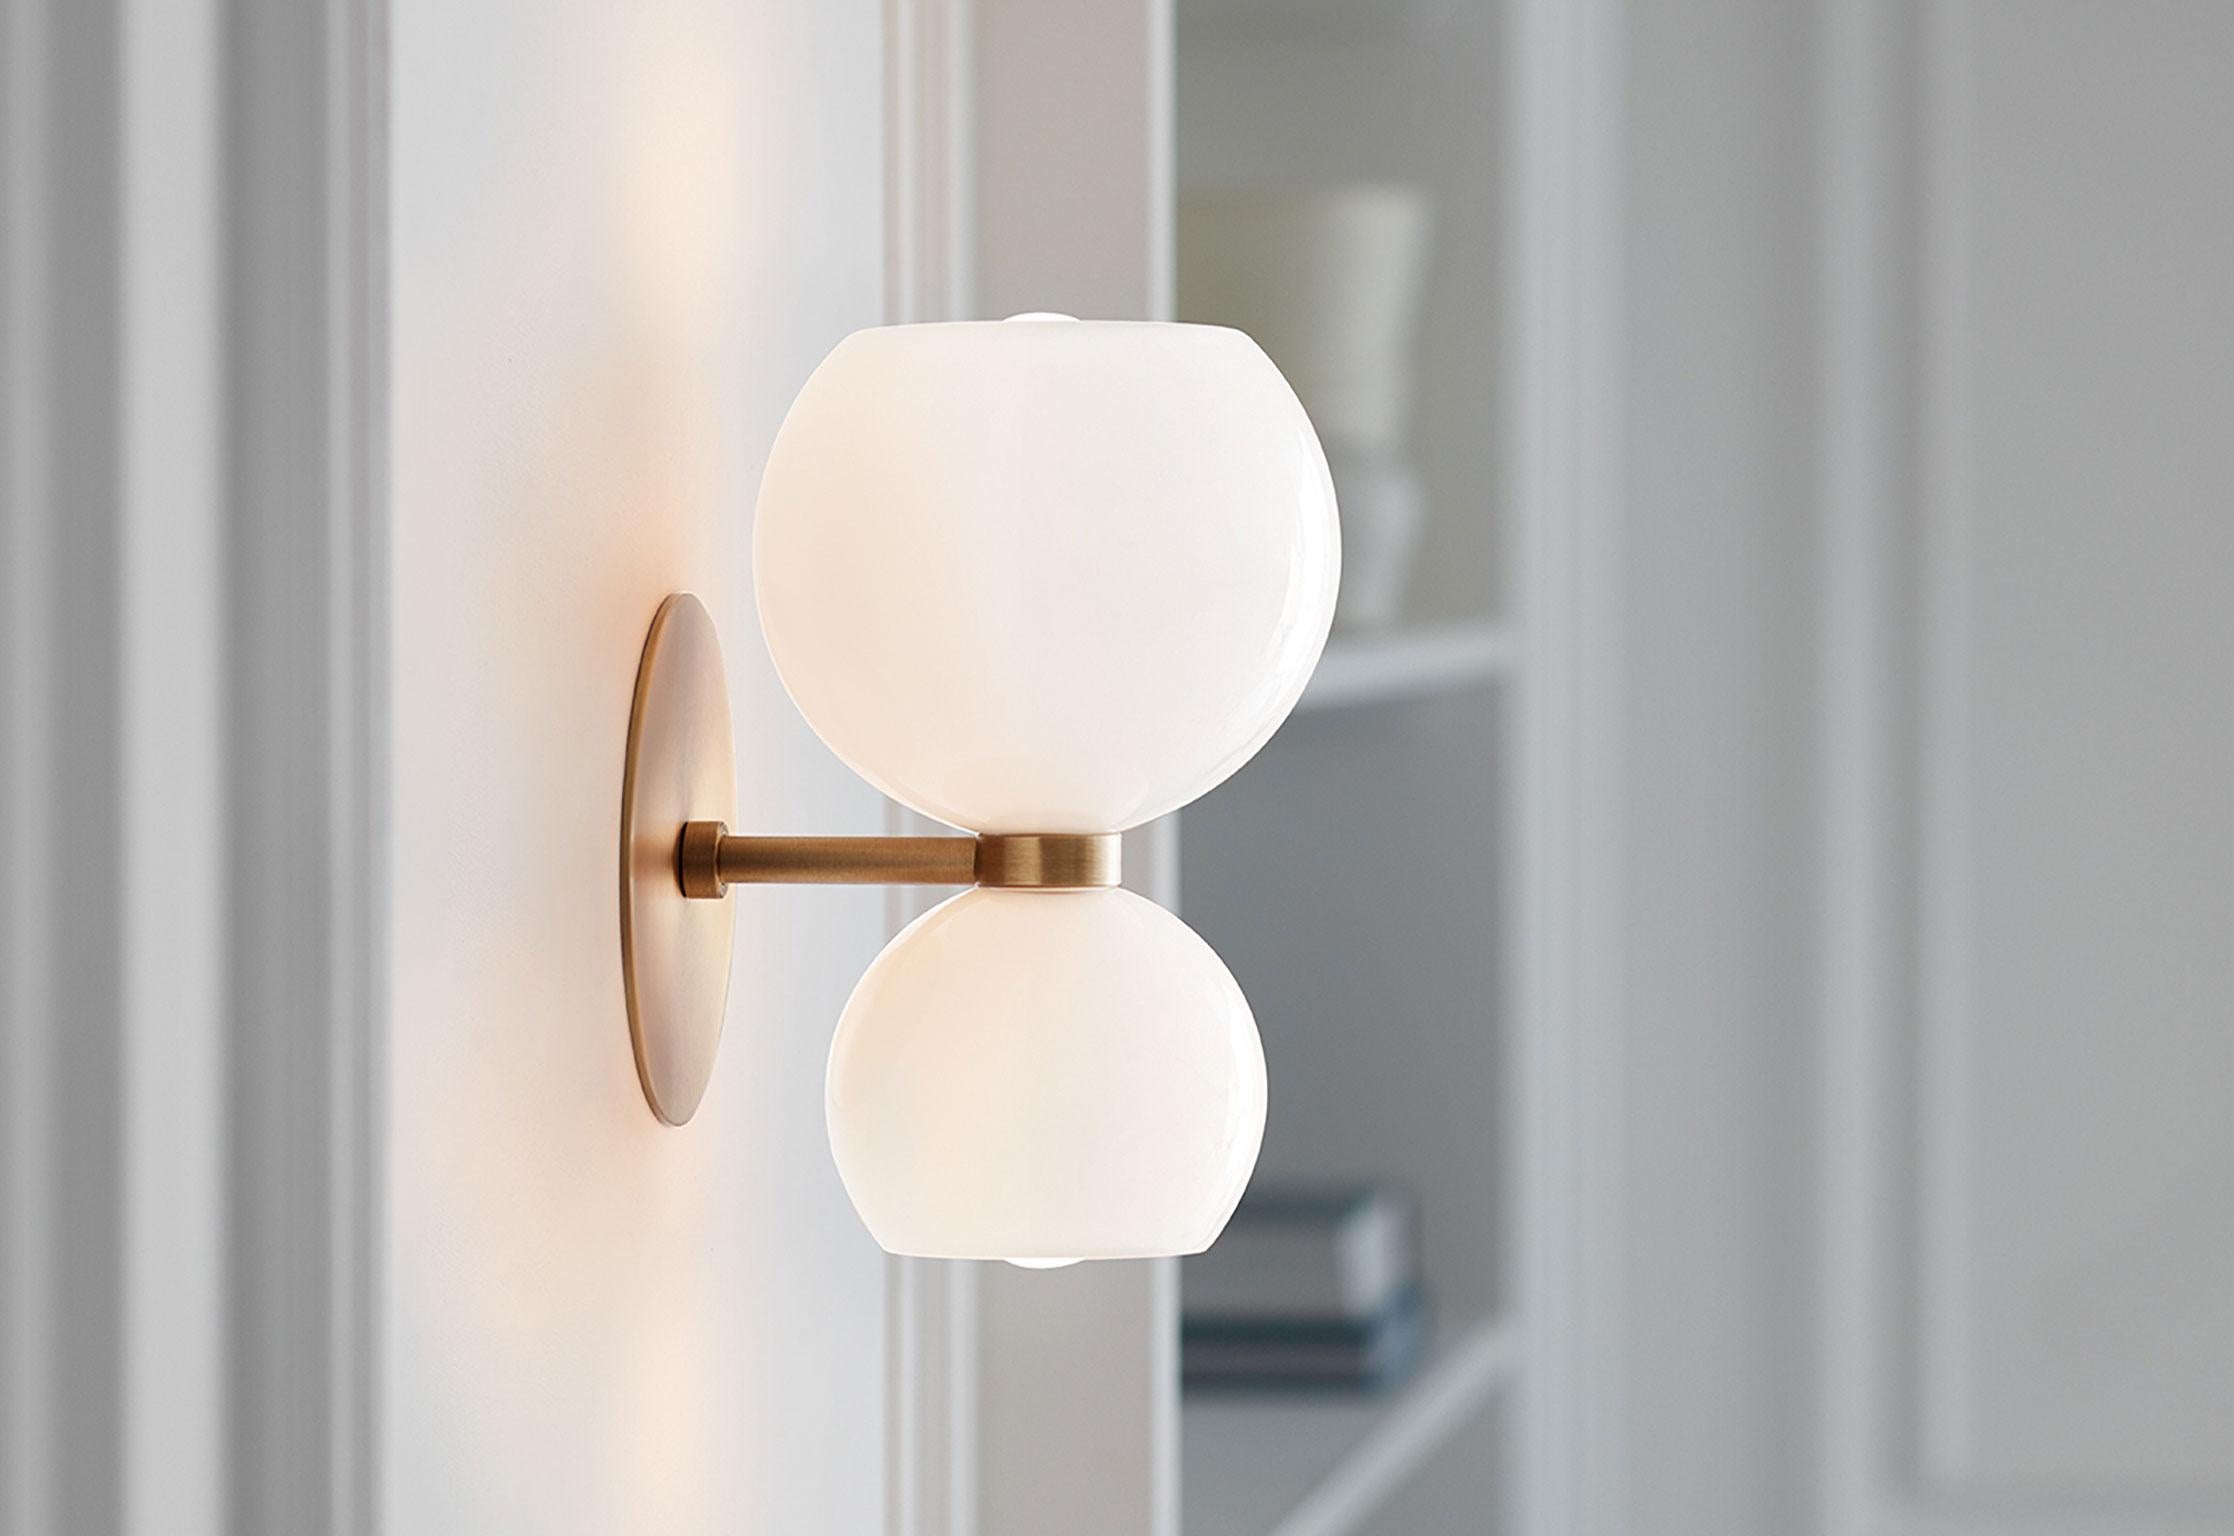 With curvaceous shapes and a nipped centre, Betty is a modern take on midcentury era design. Sculptural mold-blown glass spheres glow in opal opaque, semi-opaque colors or clear glass.

Betty is anchored by a cast brass back-plate finished in